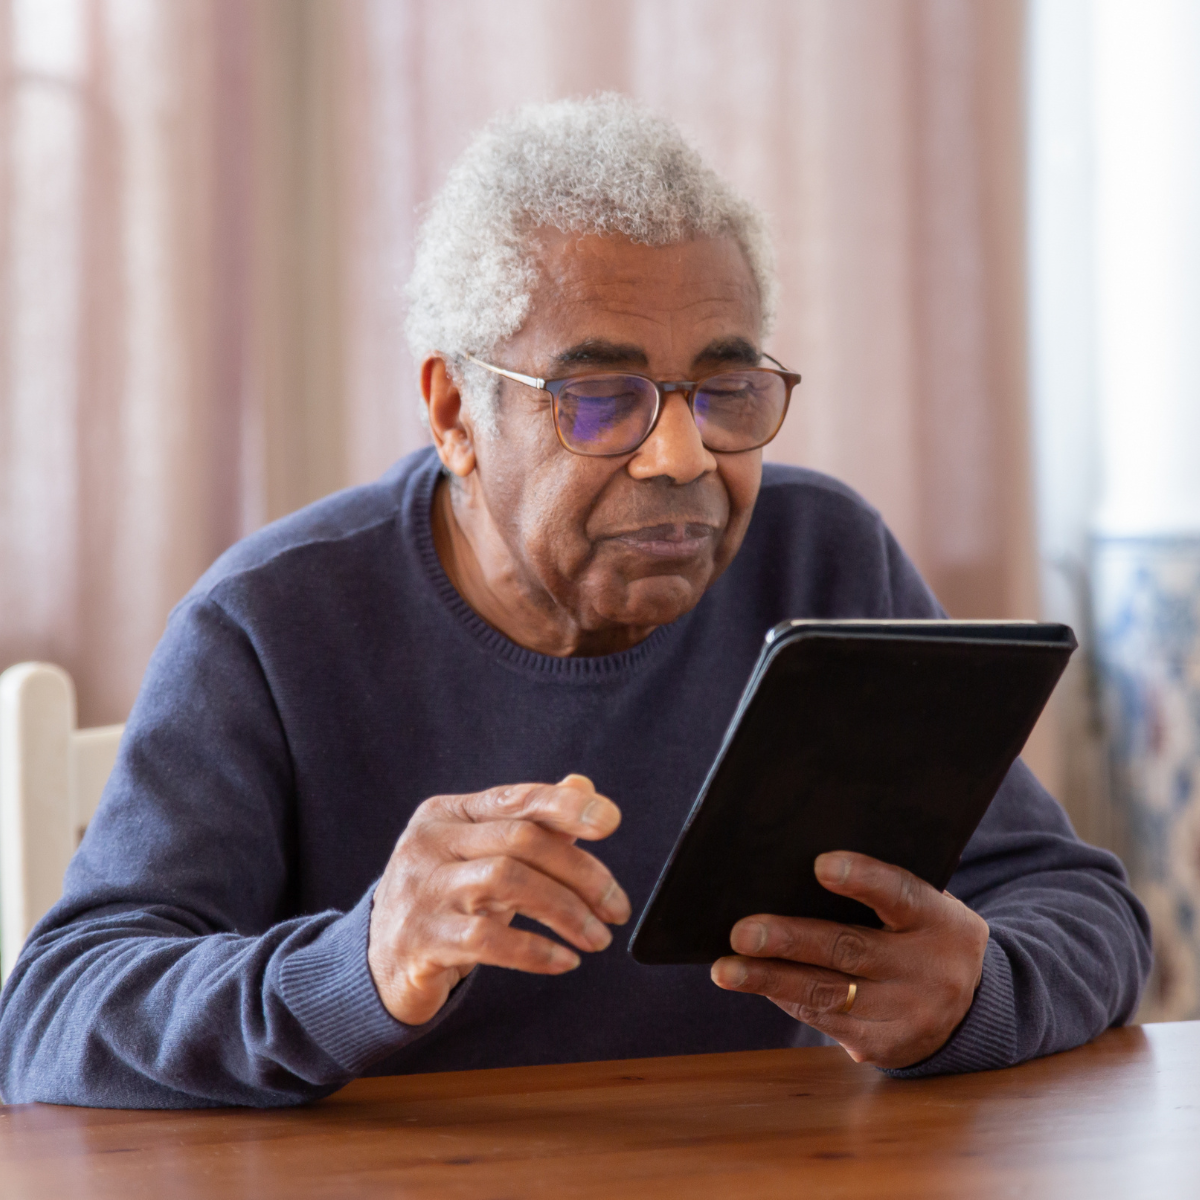 Older person using device